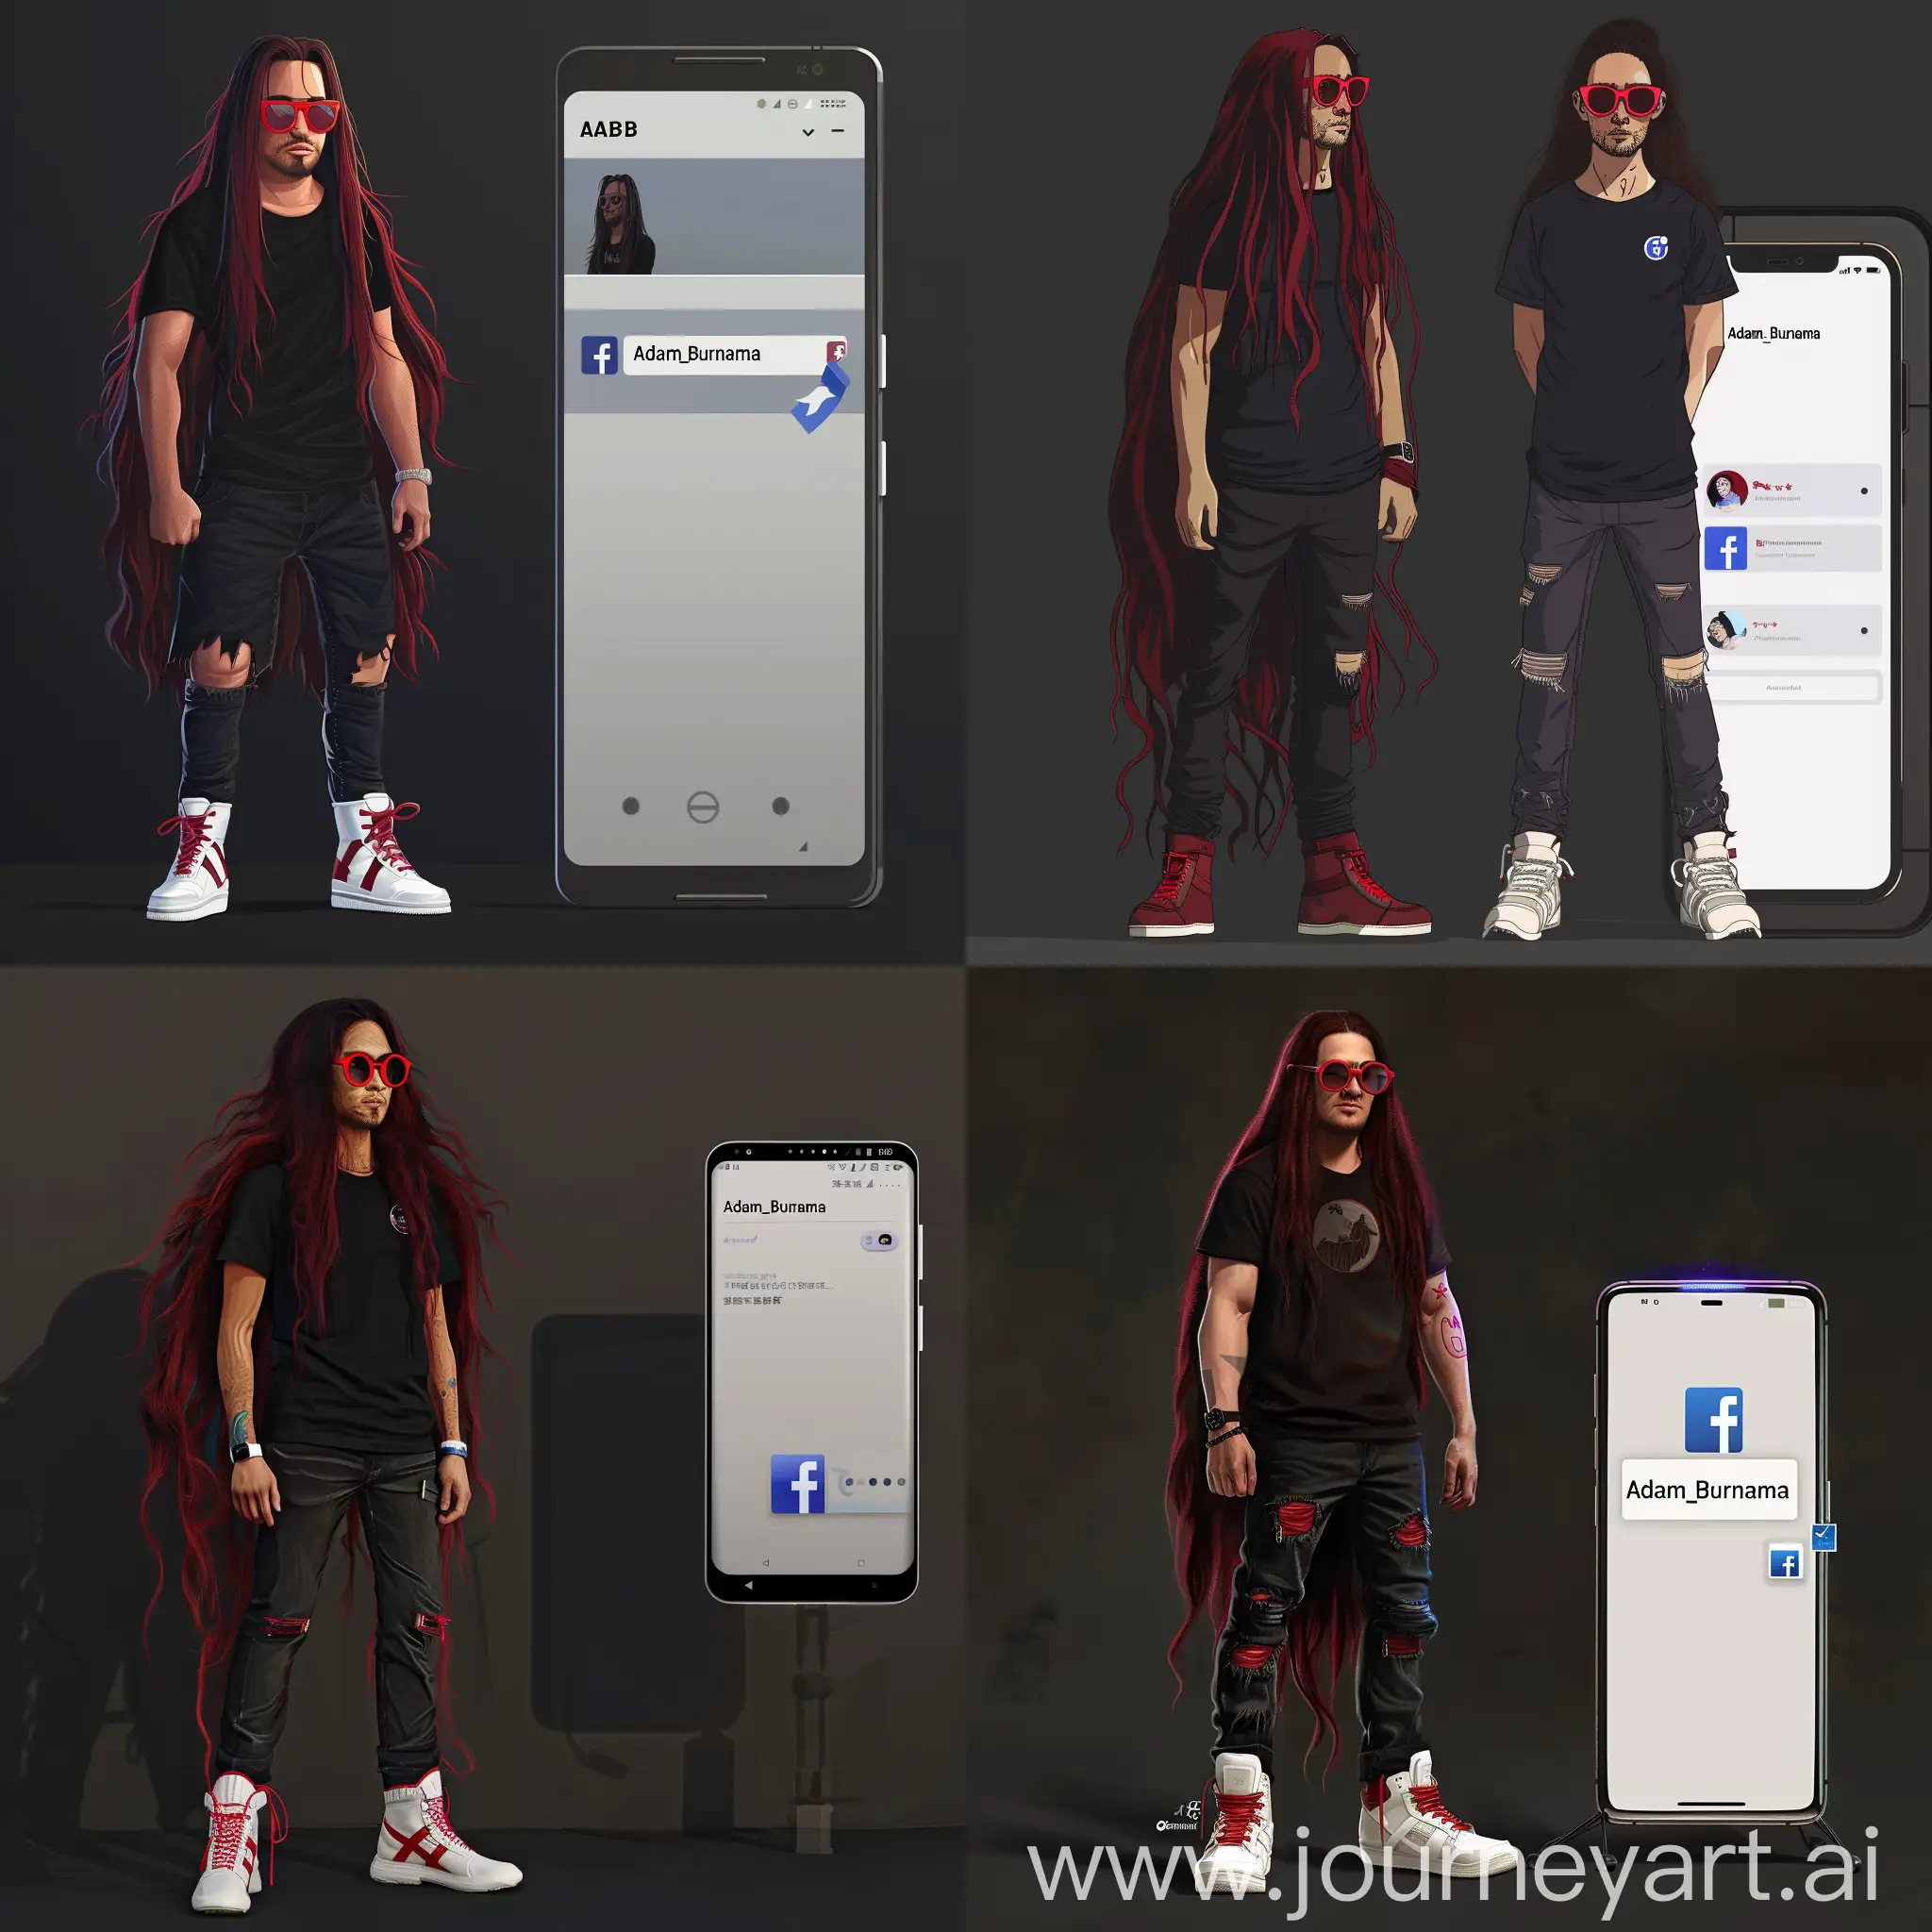 Stylish-Man-with-Maroon-Hair-and-Facebook-Profile-Display